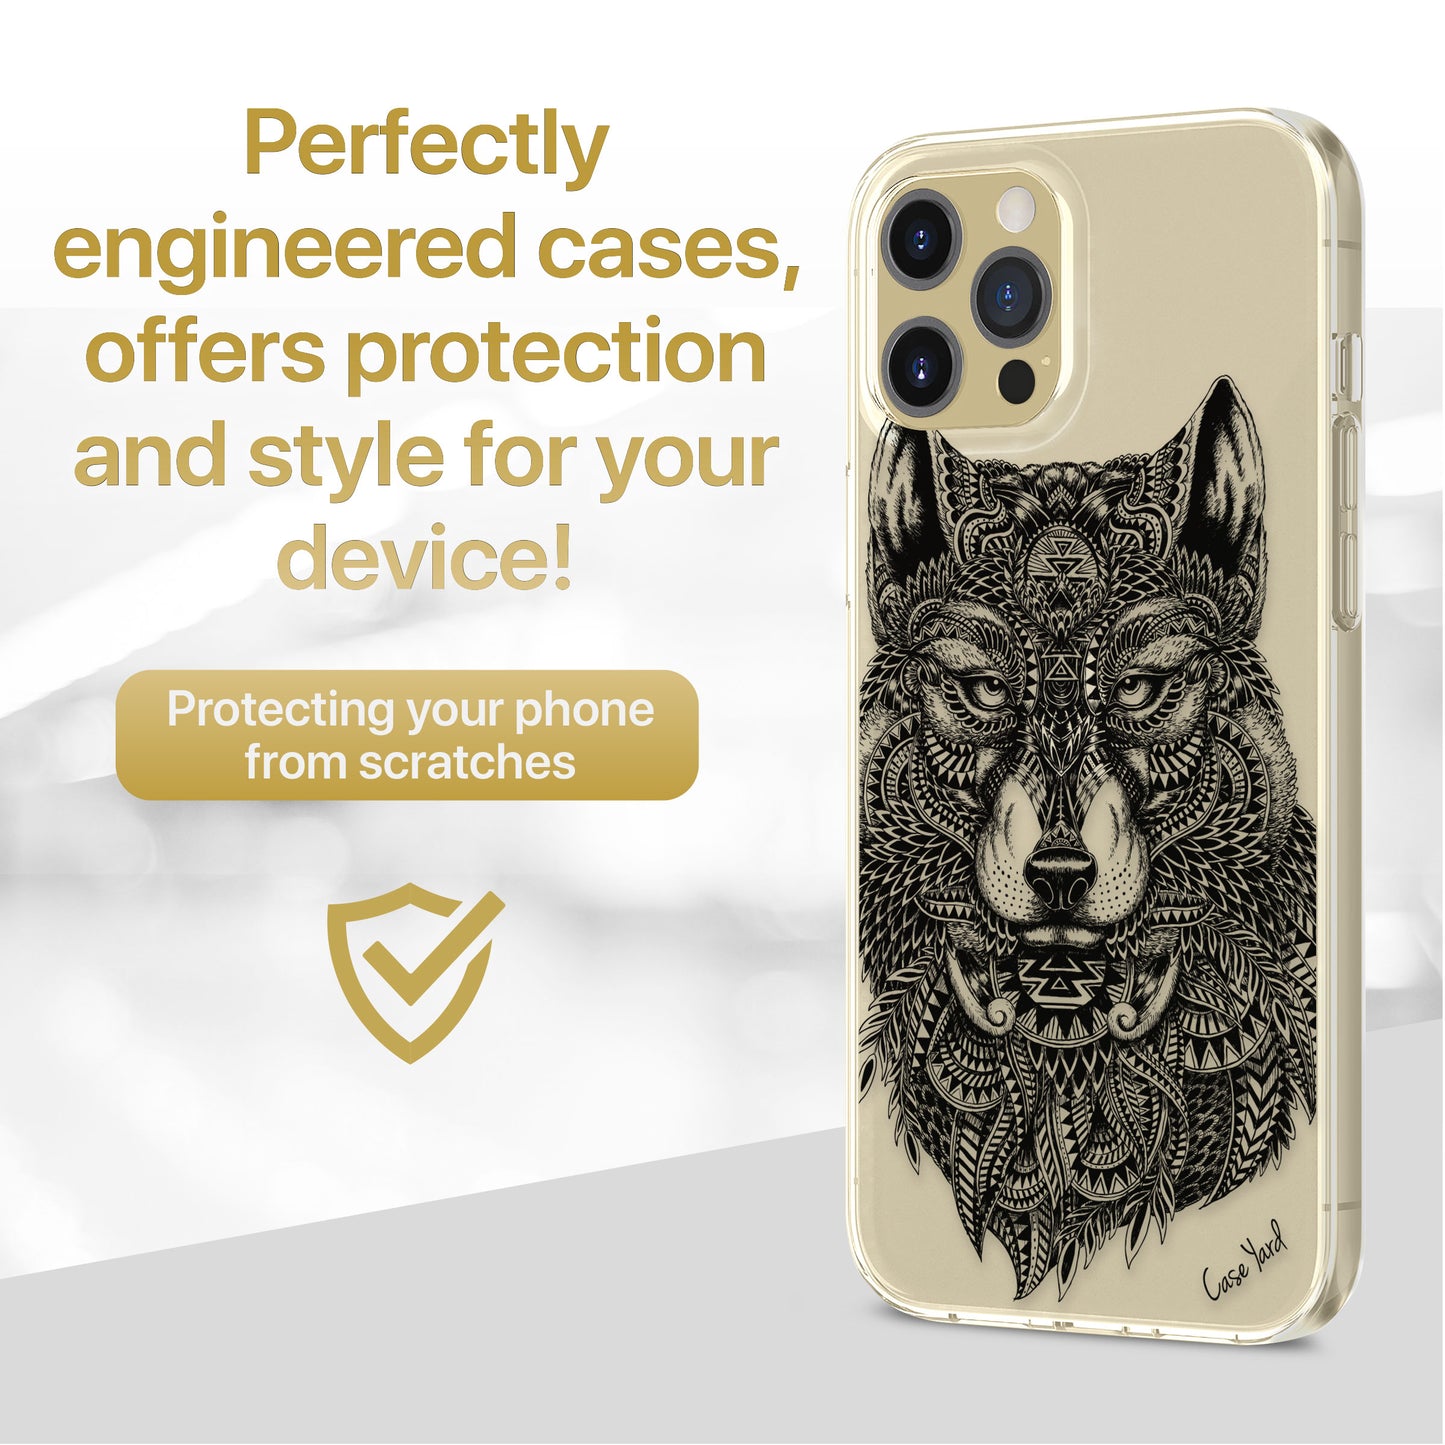 TPU Clear case with (Wolf) Design for iPhone & Samsung Phones